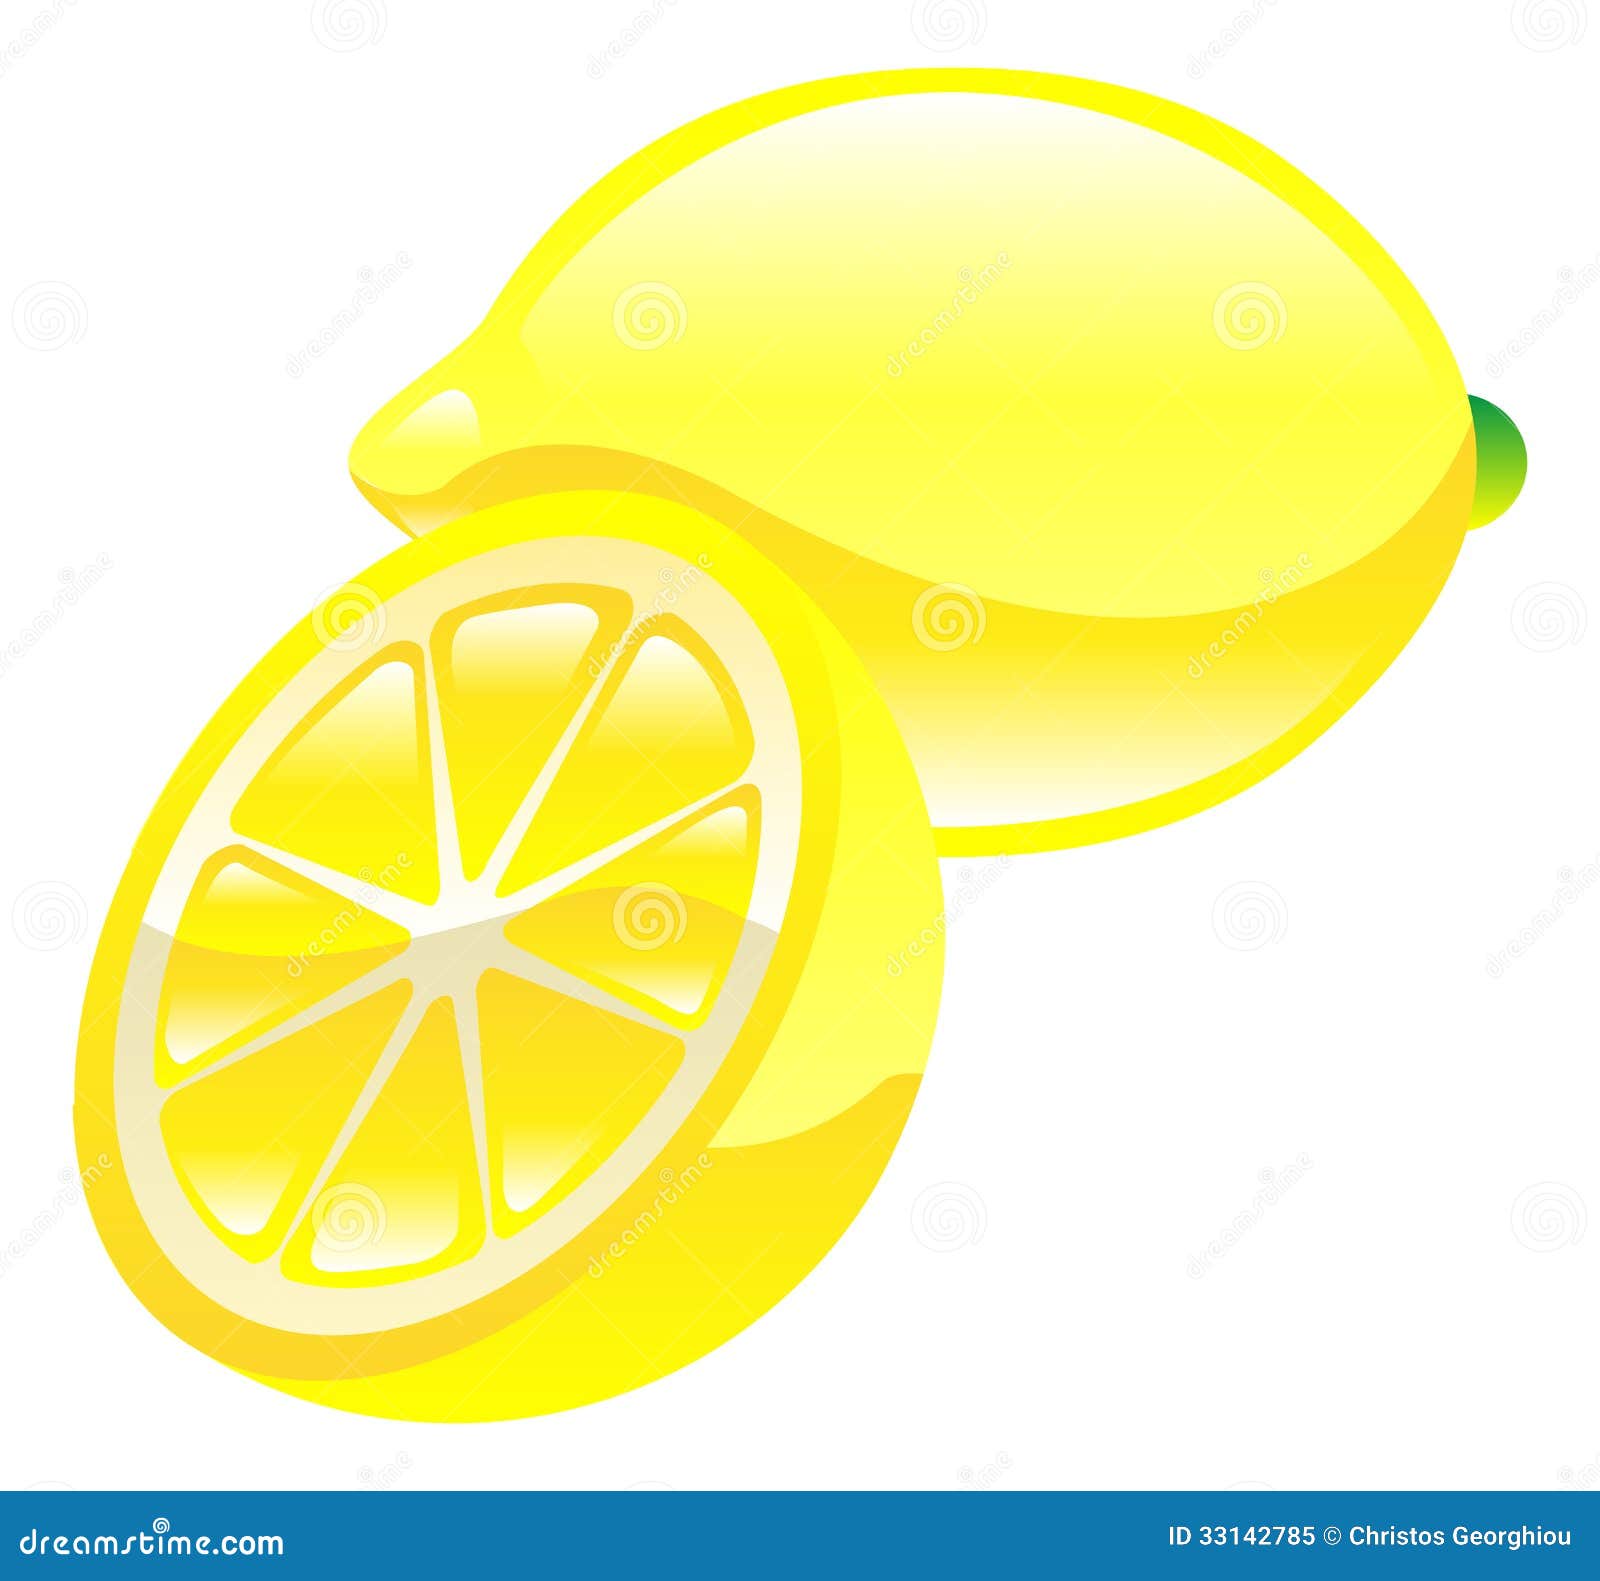 fruit clipart free download - photo #47